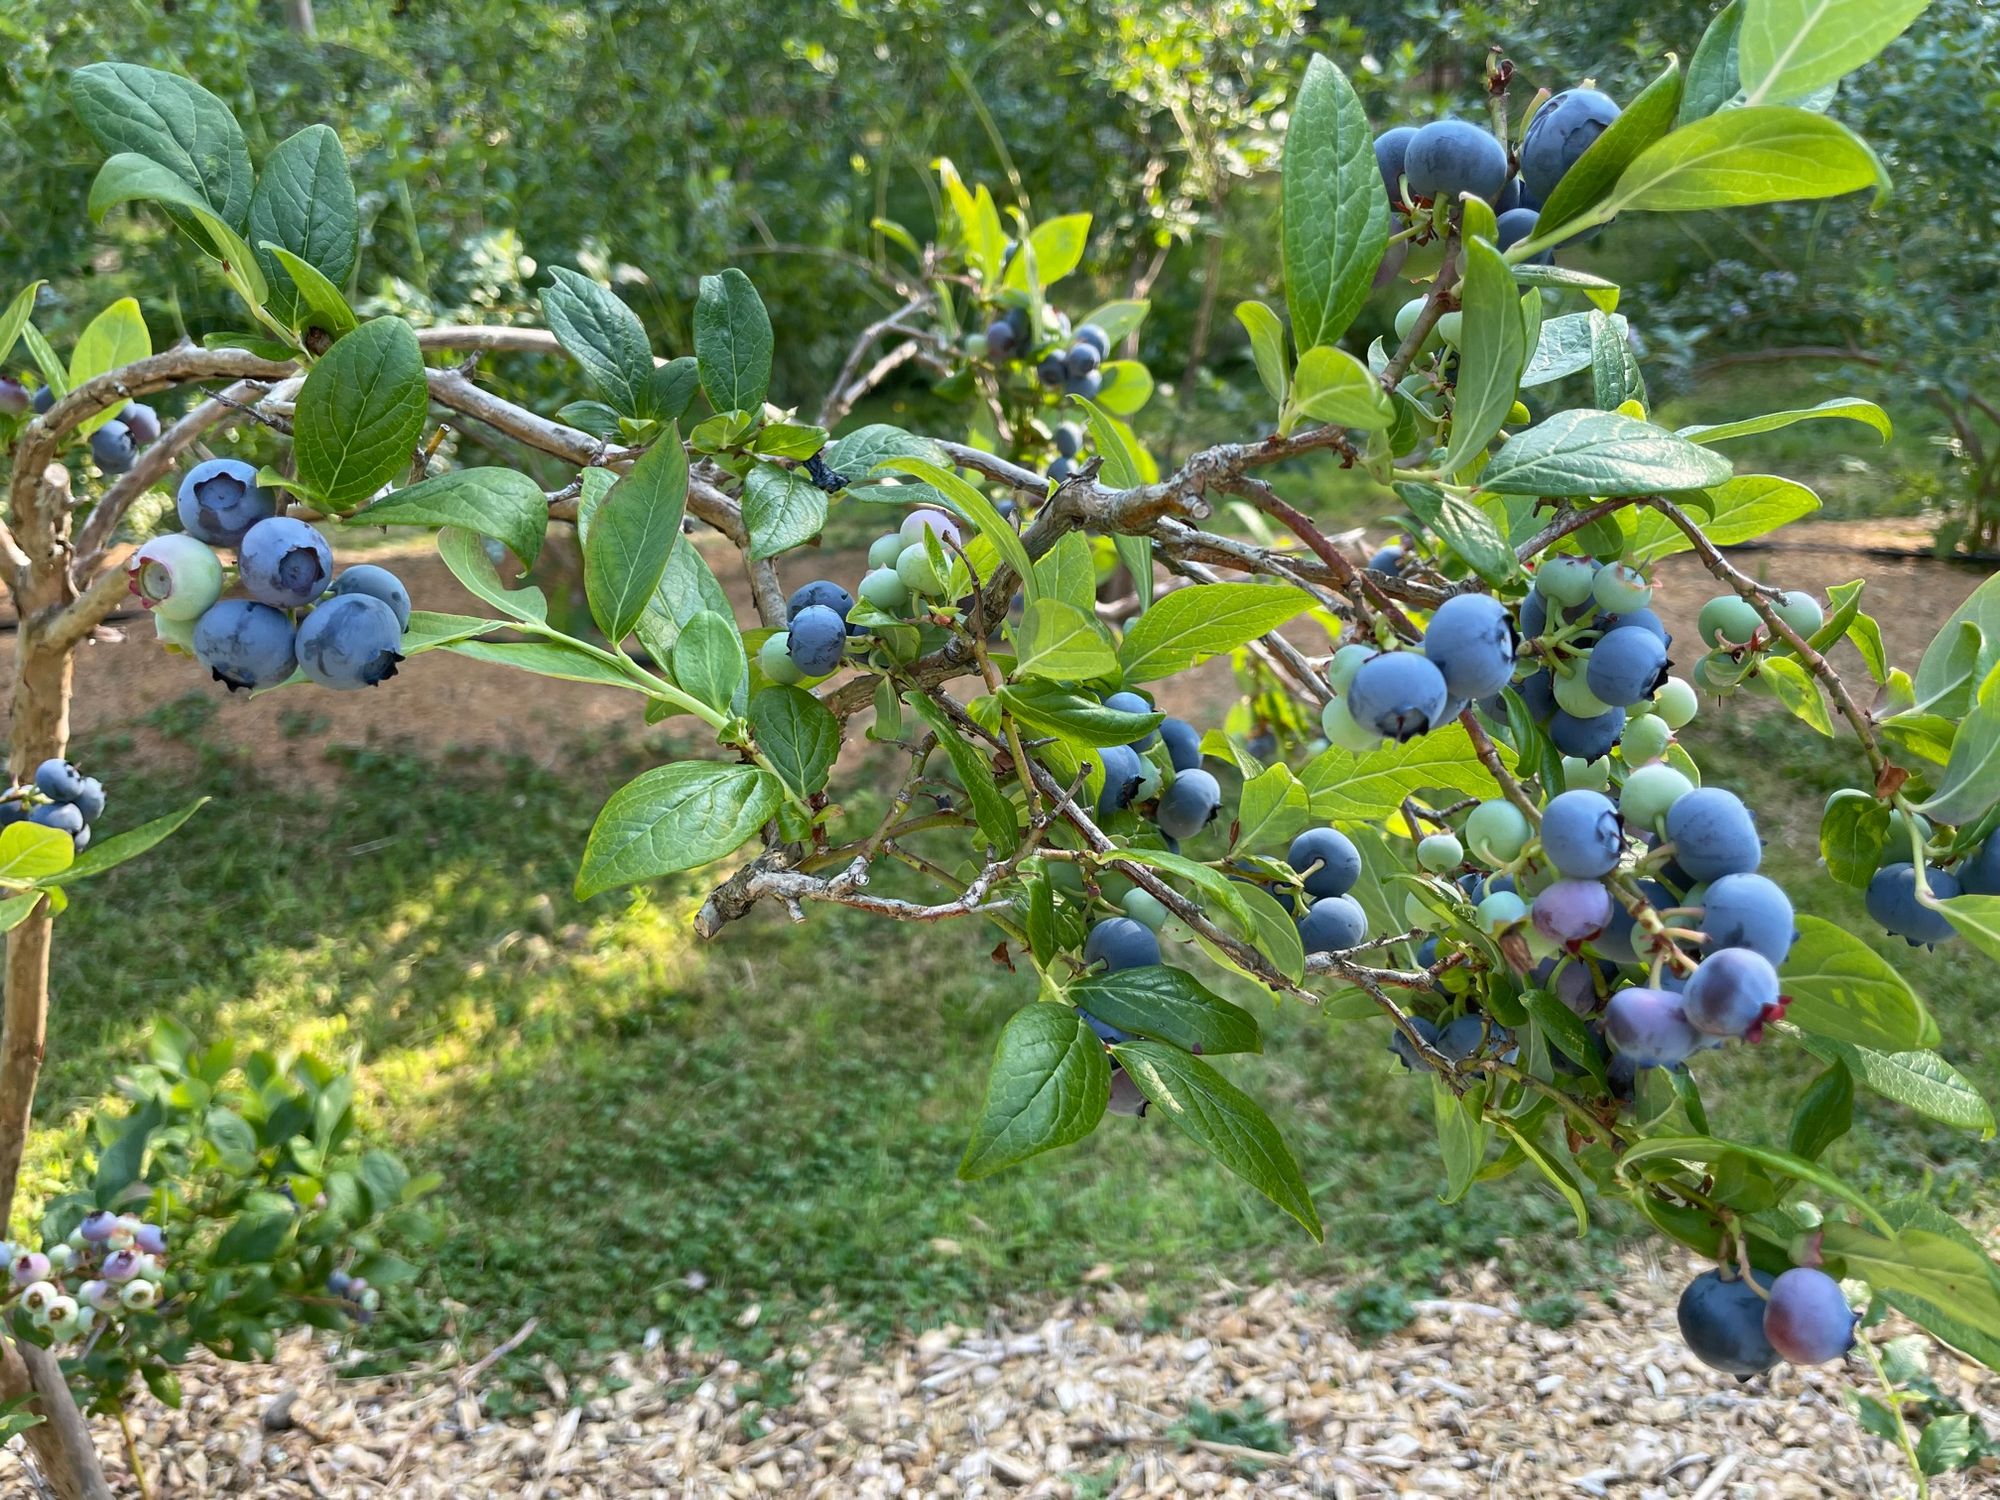 Blueberry Season is over